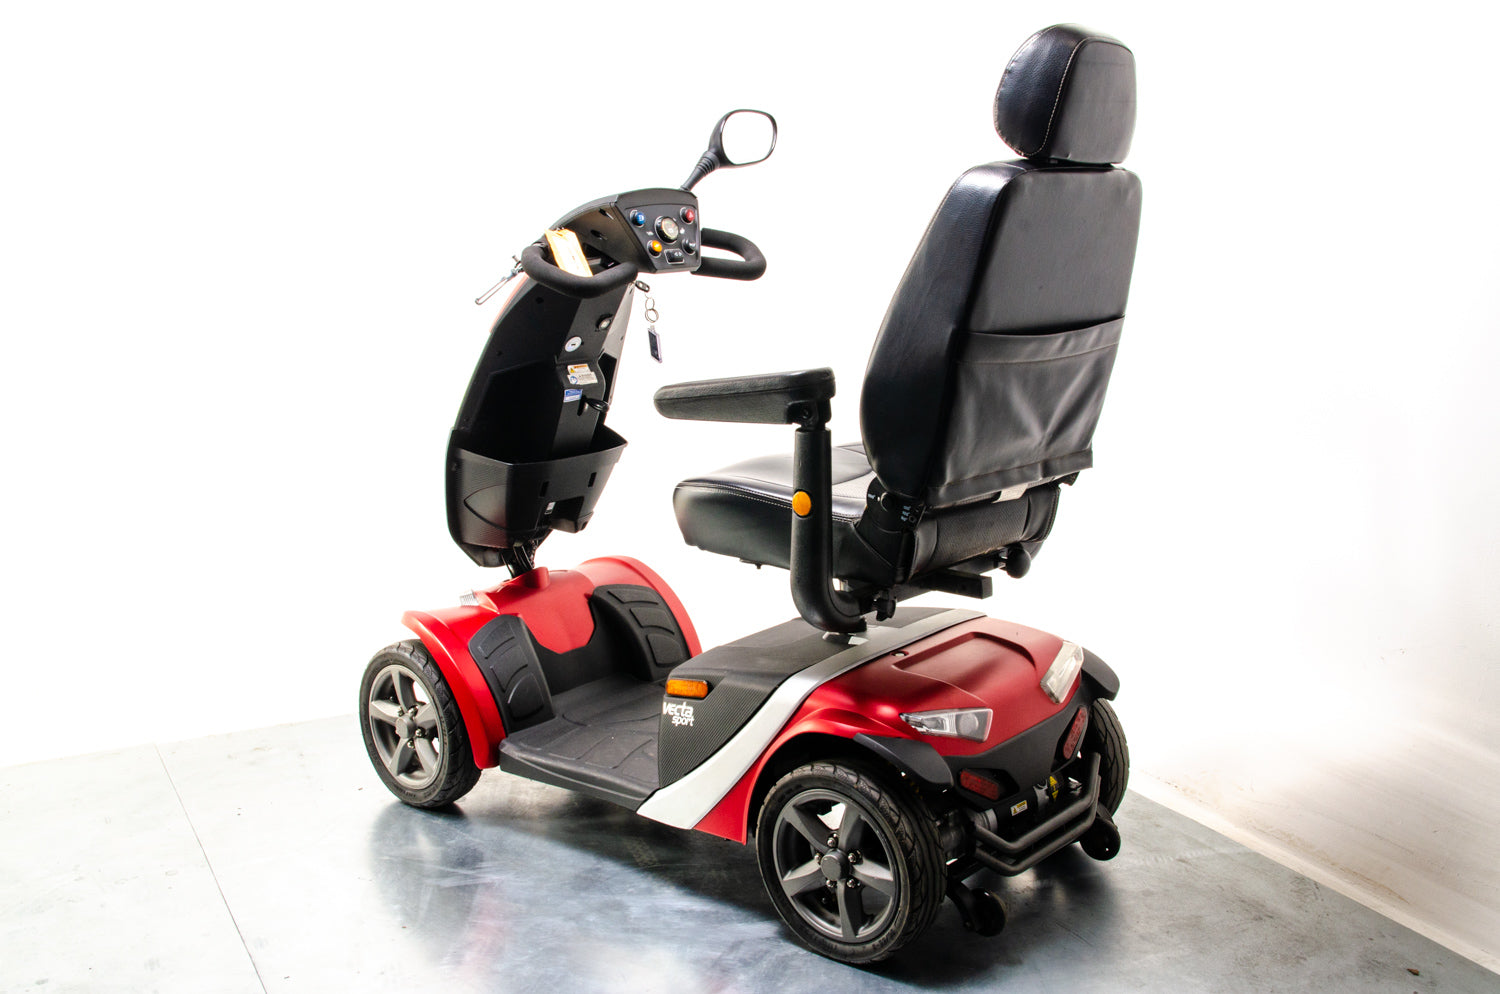 Rascal Vecta Sport Compact Used Electric Mobility Scooter 8mph Max Grip Suspension All-Terrain Red